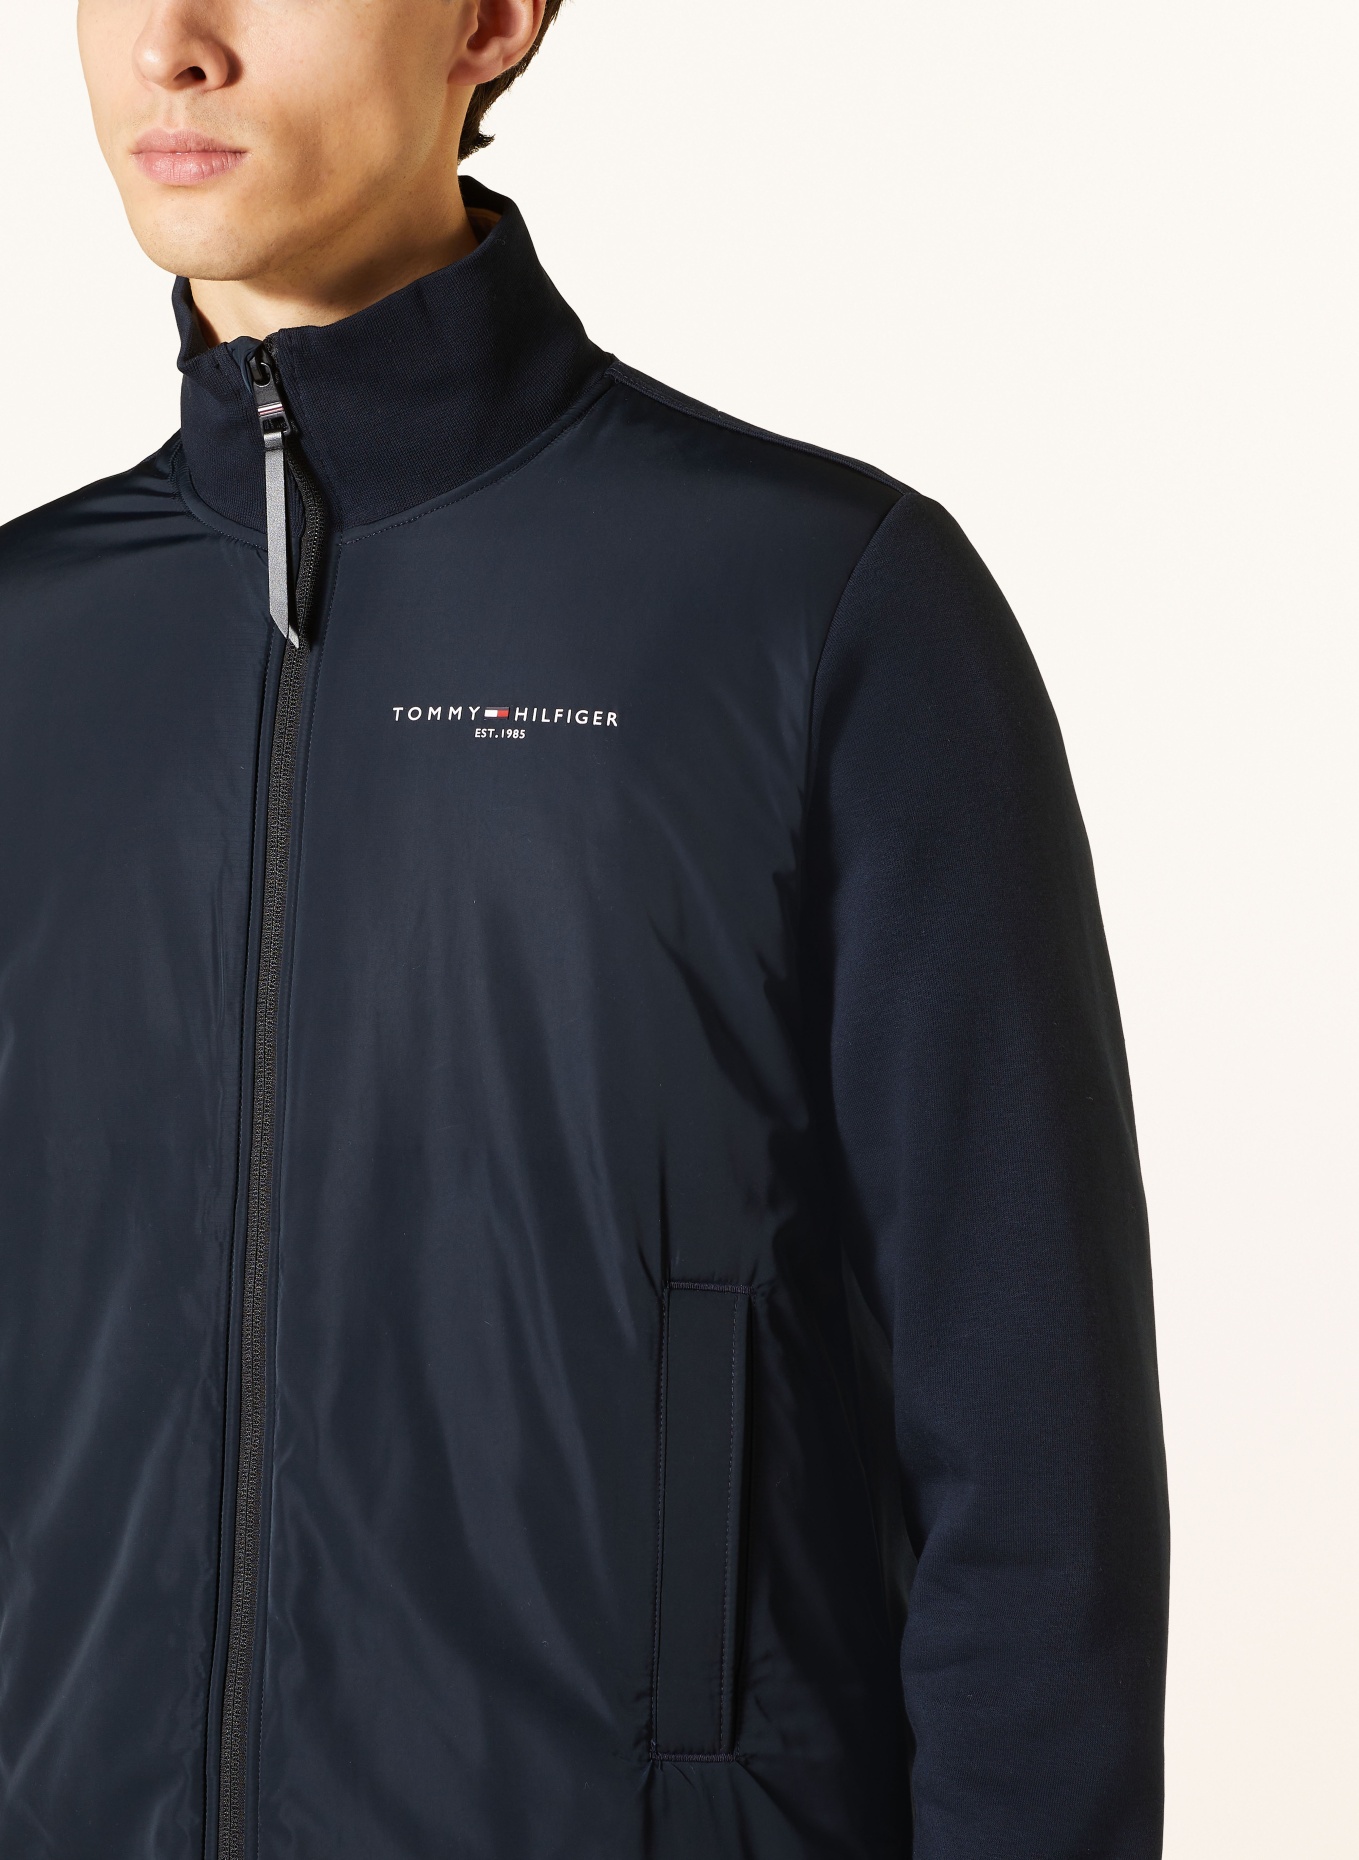 TOMMY HILFIGER Sweat jacket in mixed materials, Color: DARK BLUE (Image 4)